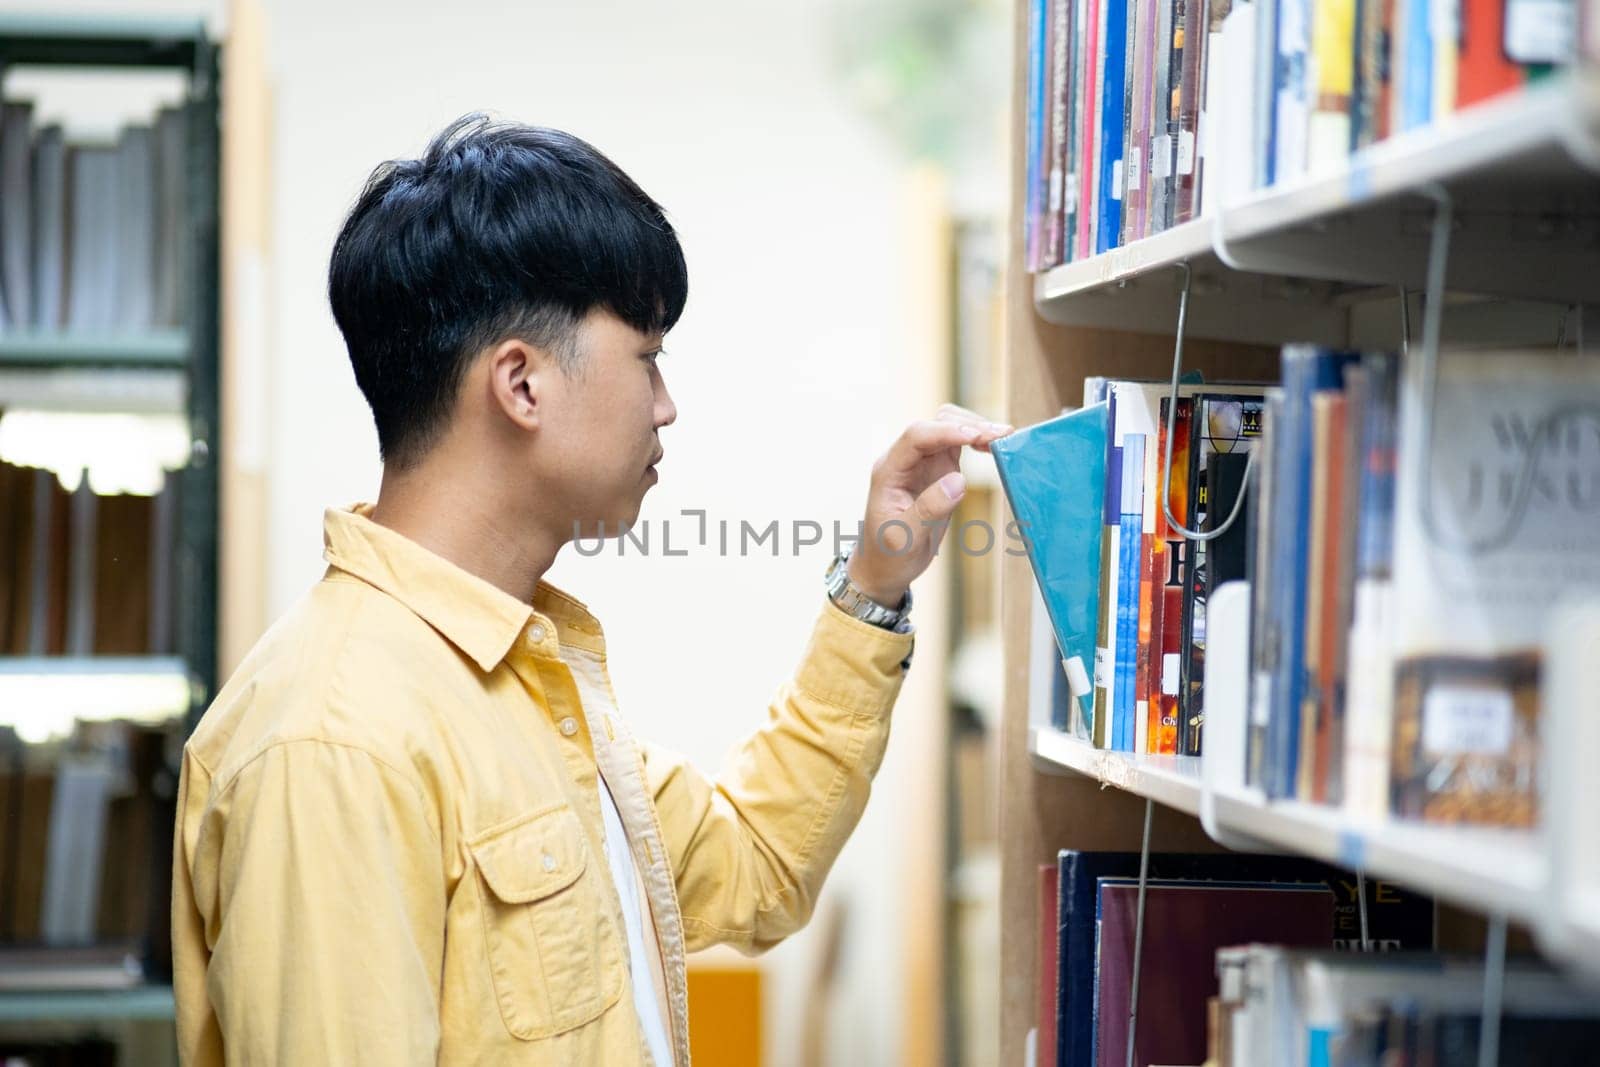 A man in a yellow shirt is looking at a book on a library shelf by ijeab